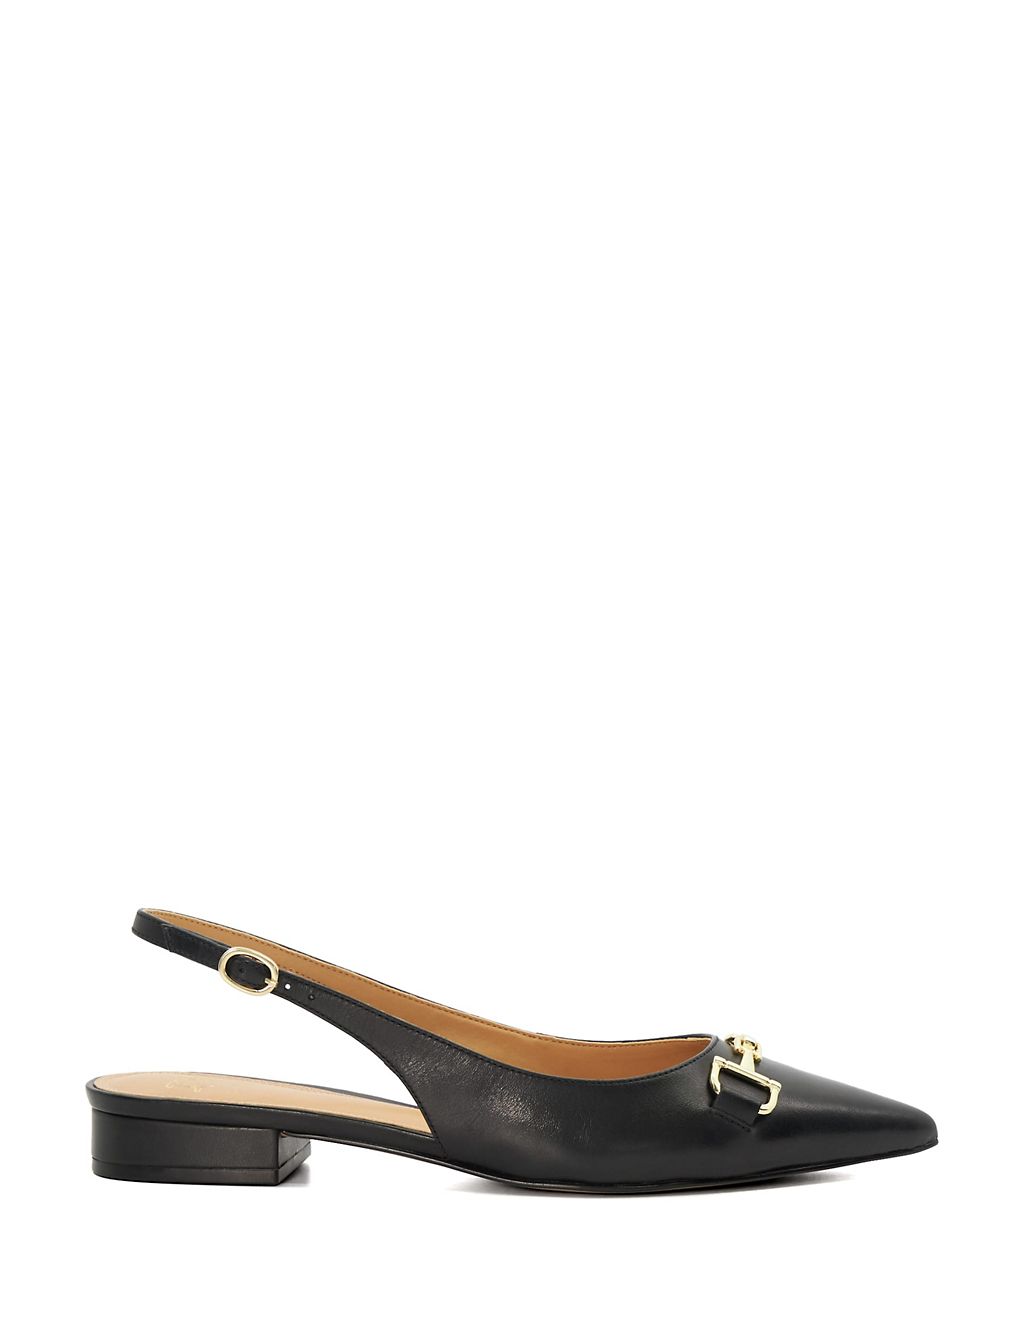 Wide Fit Buckle Flat Slingback Shoes 3 of 5